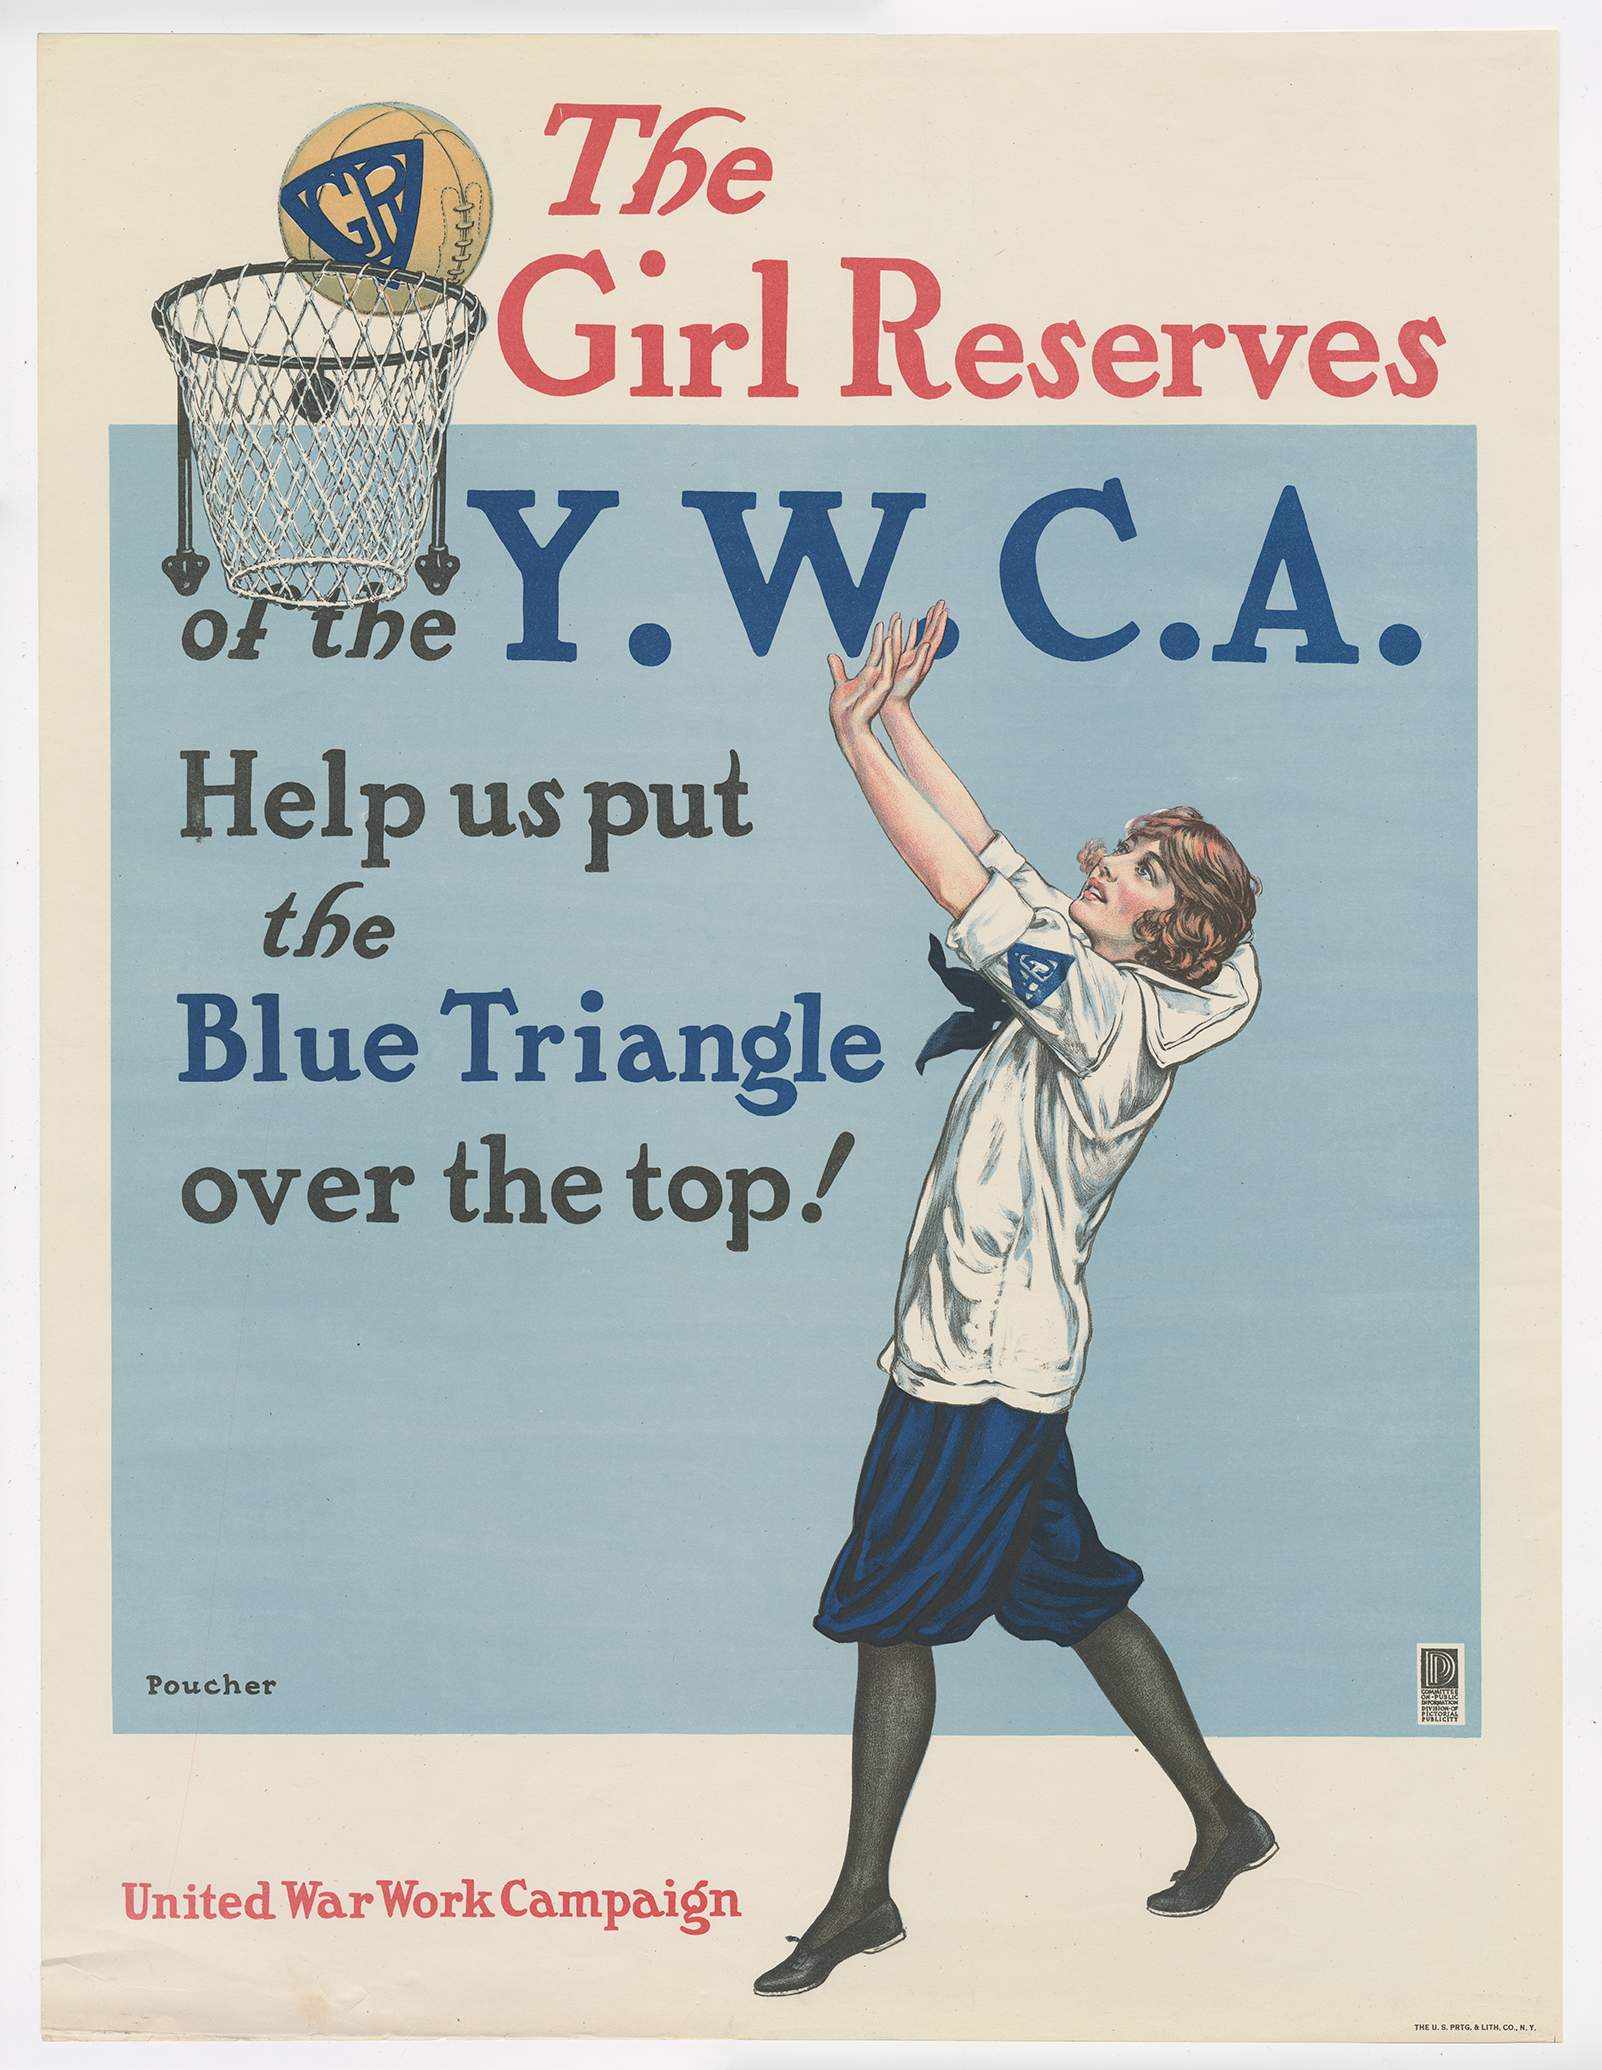 Poster with an illustration of a white girl in a sailor suit tossing a ball into a basketball hoop. Text: 'The Girl Reserves of the Y.W.C.A. / Help us put the Blue Triangle over the top!'